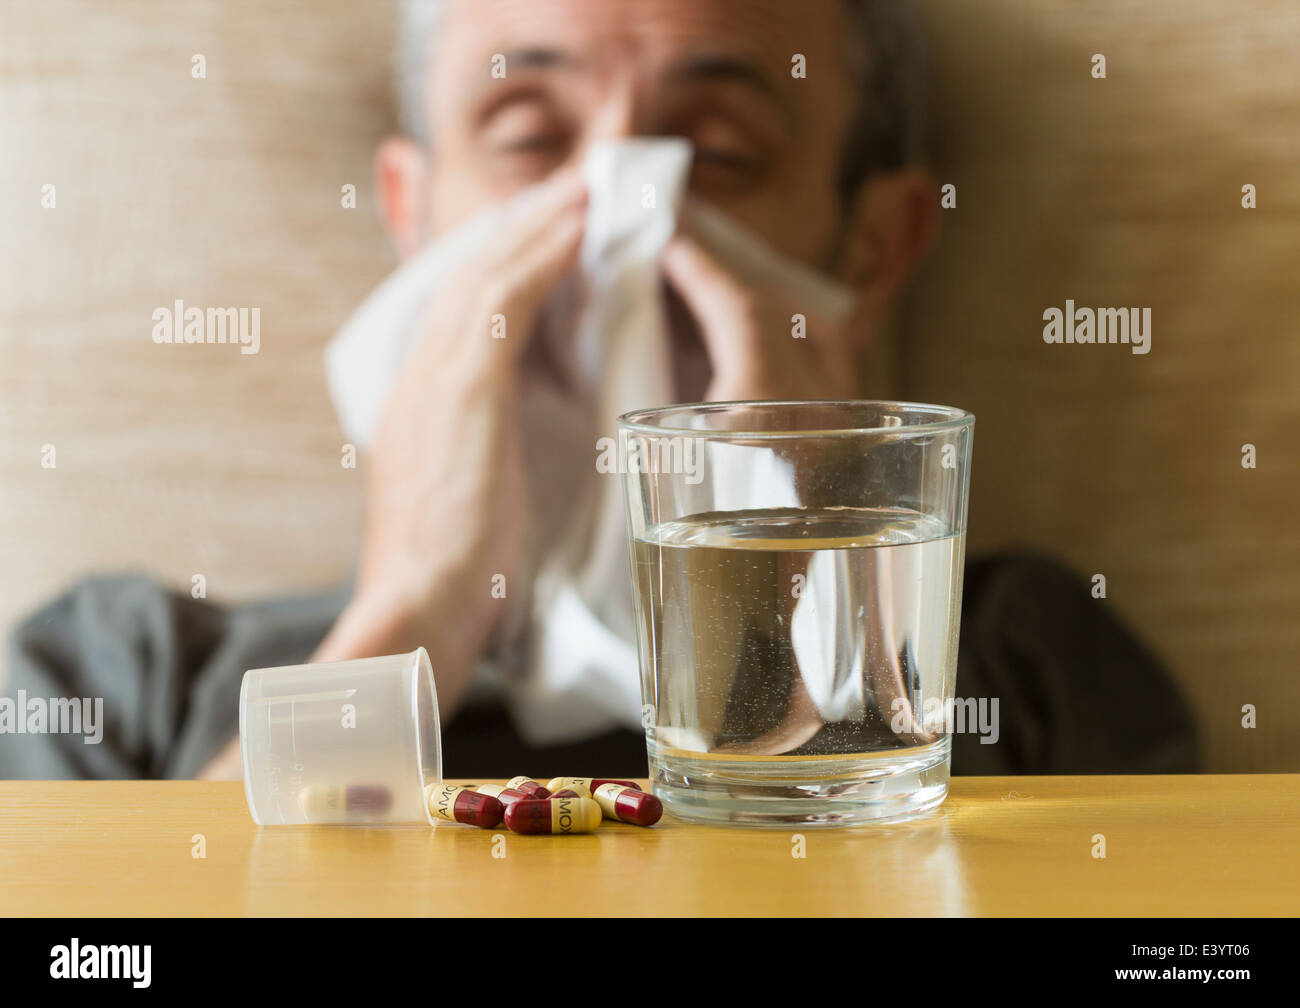 Glass of water and 500mg Amoxicillin antibiotic tablets on table next to man with cold blowing his nose. Stock Photo